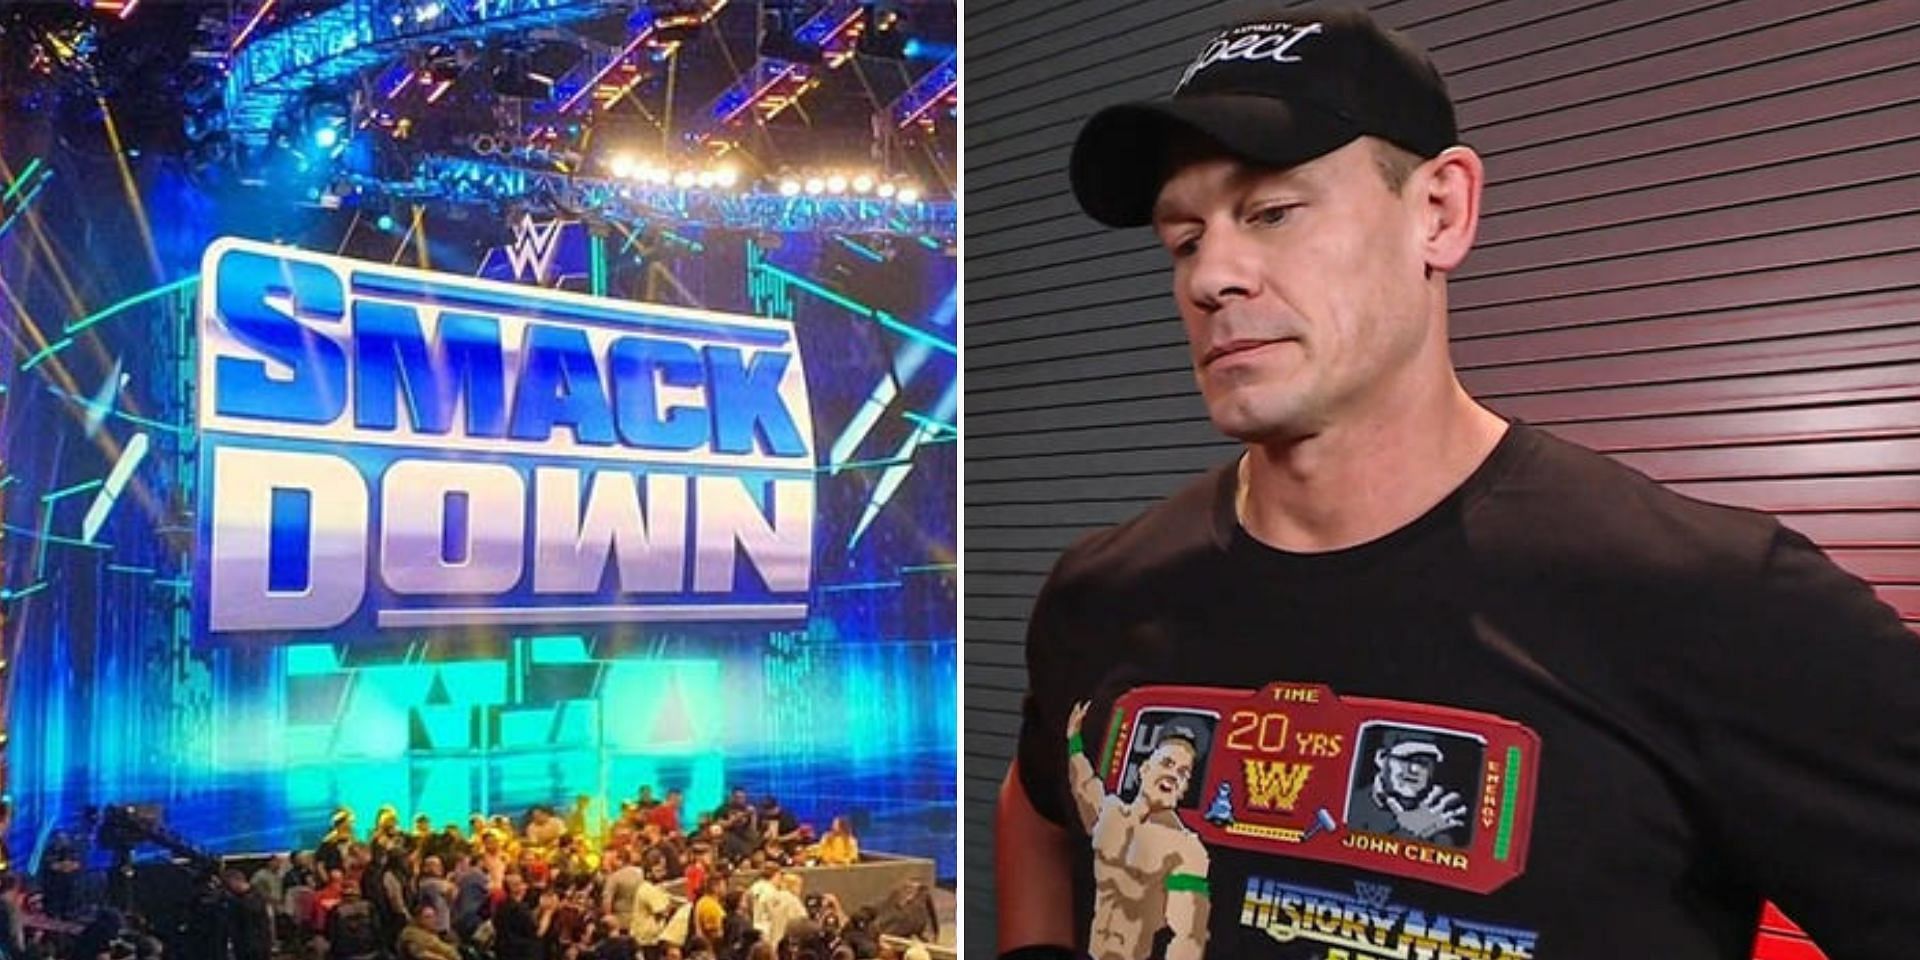 John Cena reunited with his old rival on SmackDown